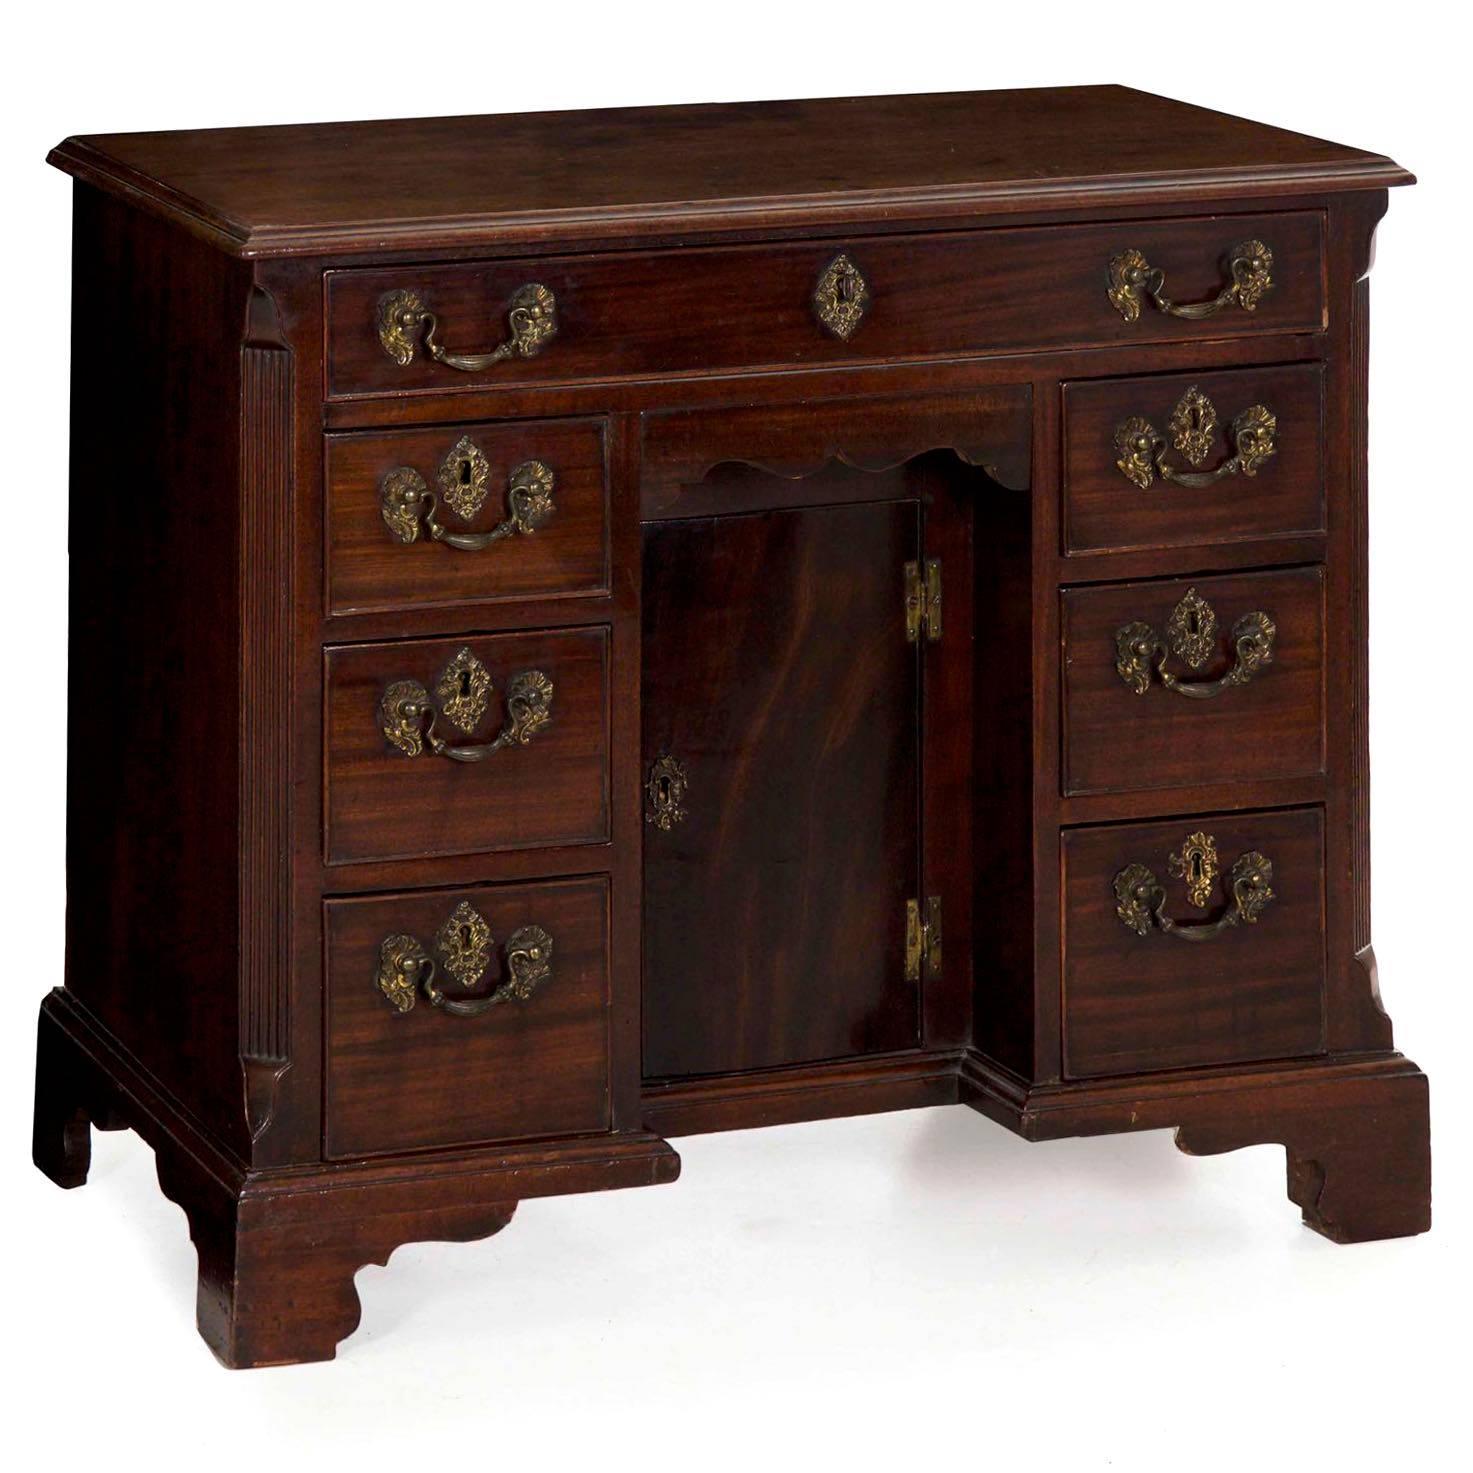 With a diminutive and restrained profile, this fine George II period kneehole desk is characterized by a single full width frieze drawer over a hidden centre drawer with “cupid’s bow” scalloping over a prospect door set back into the case. This is